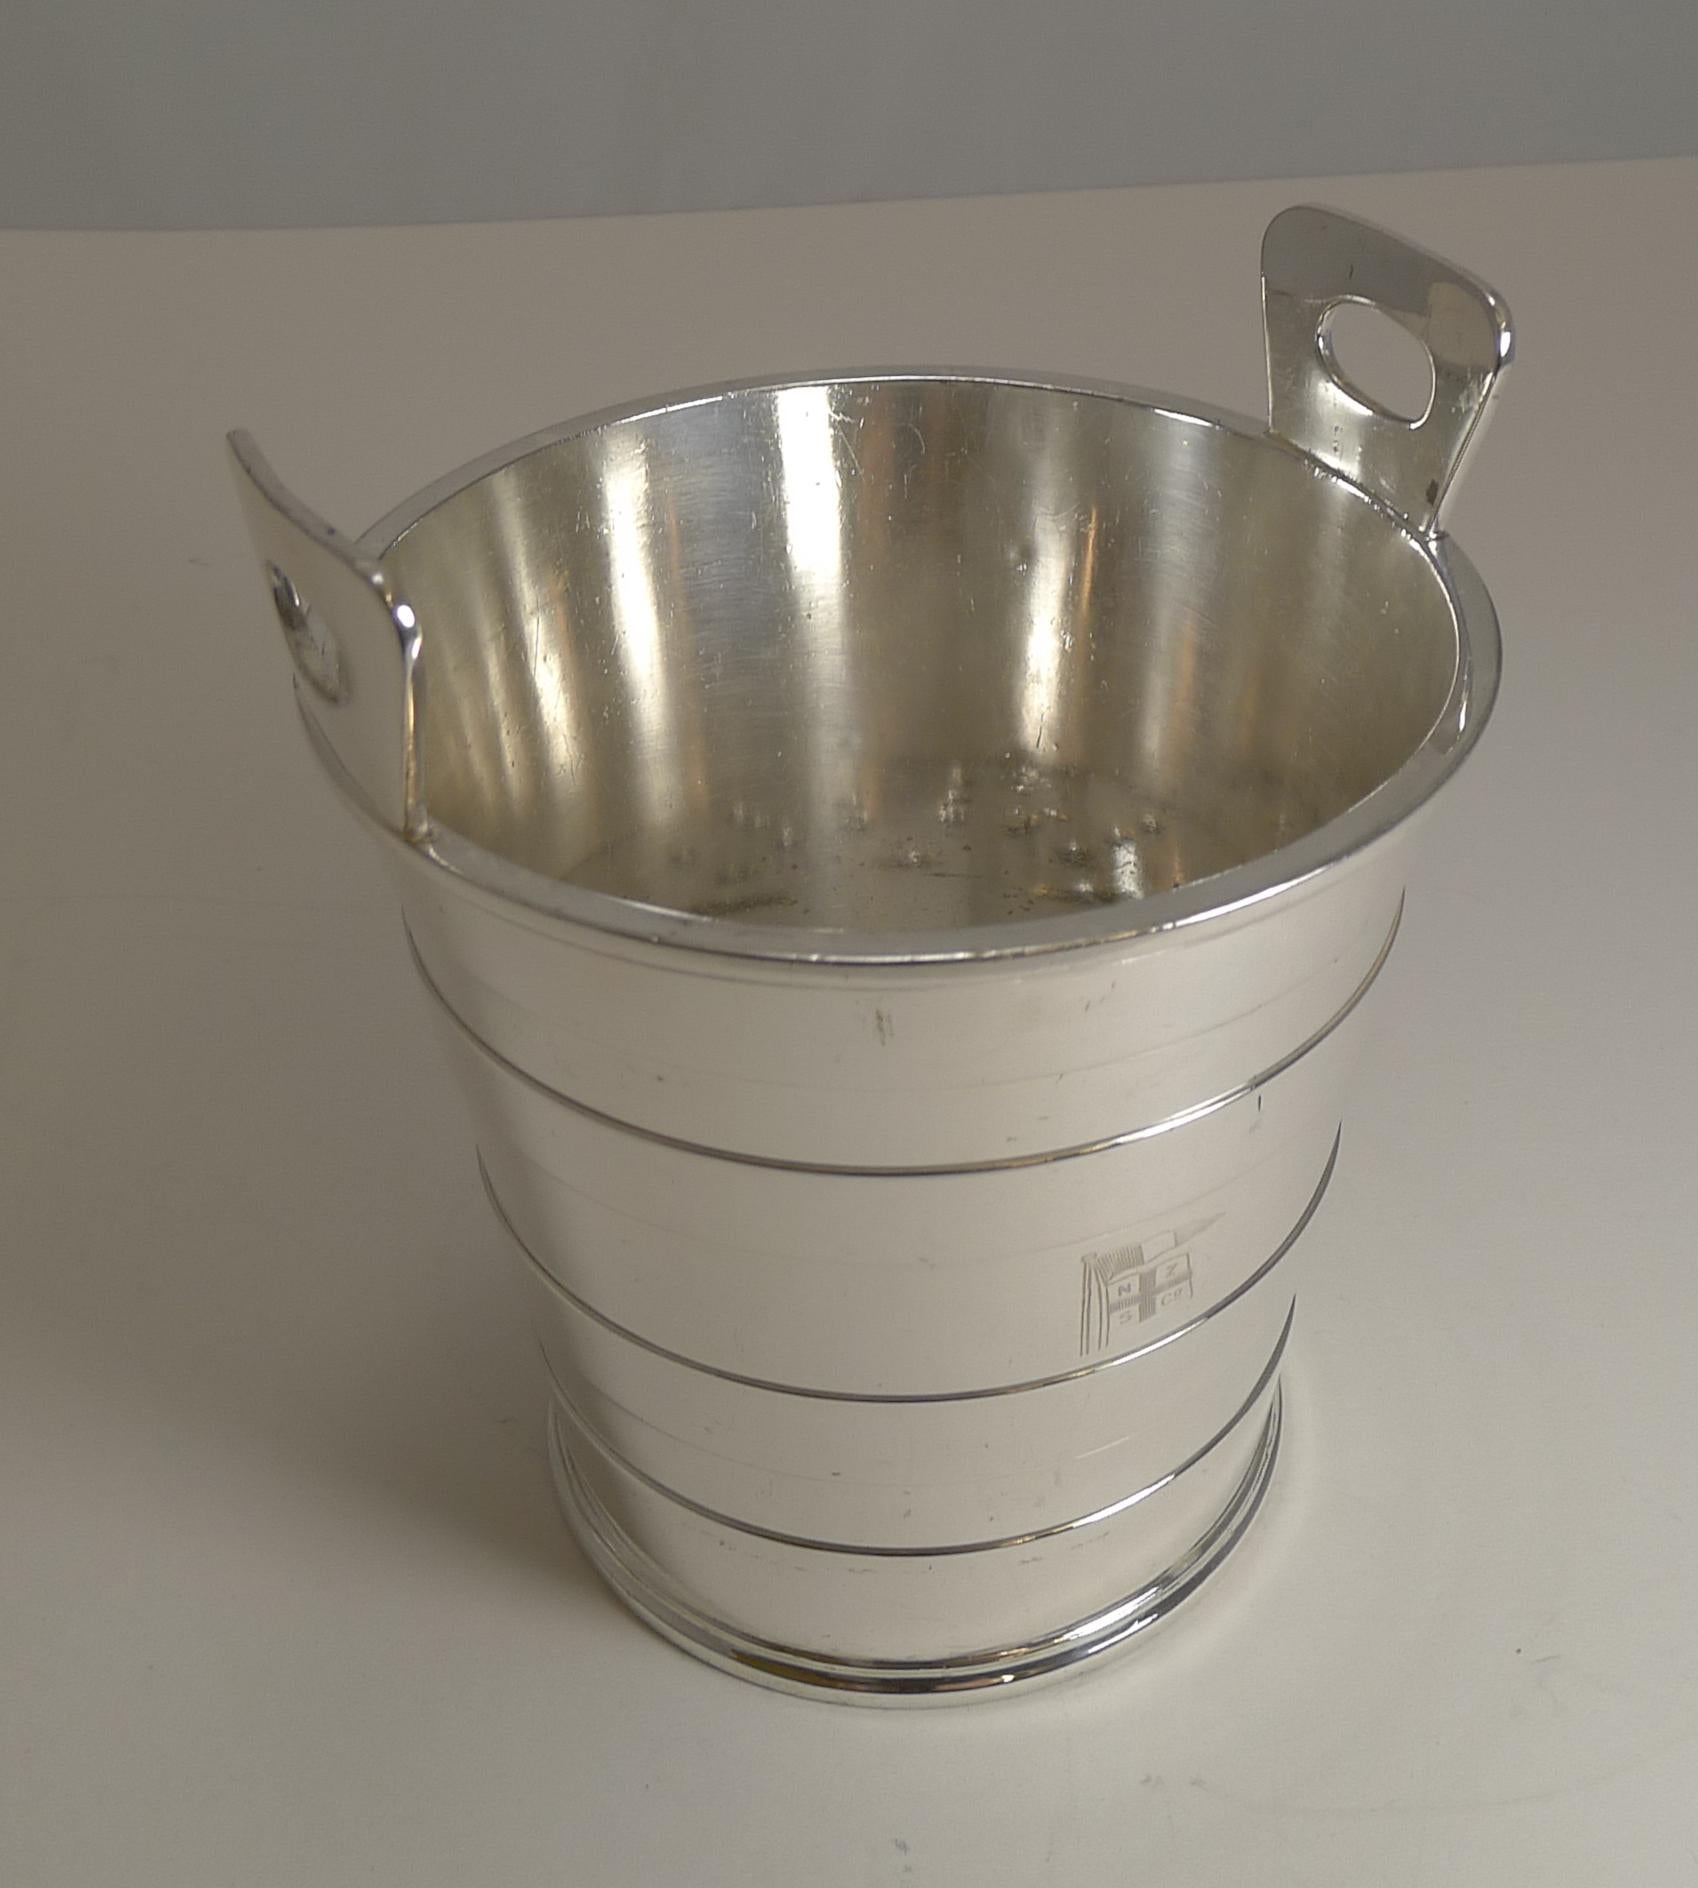 English Silver Plated Ice Bucket by Mappin and Webb, New Zealand Shipping Co.